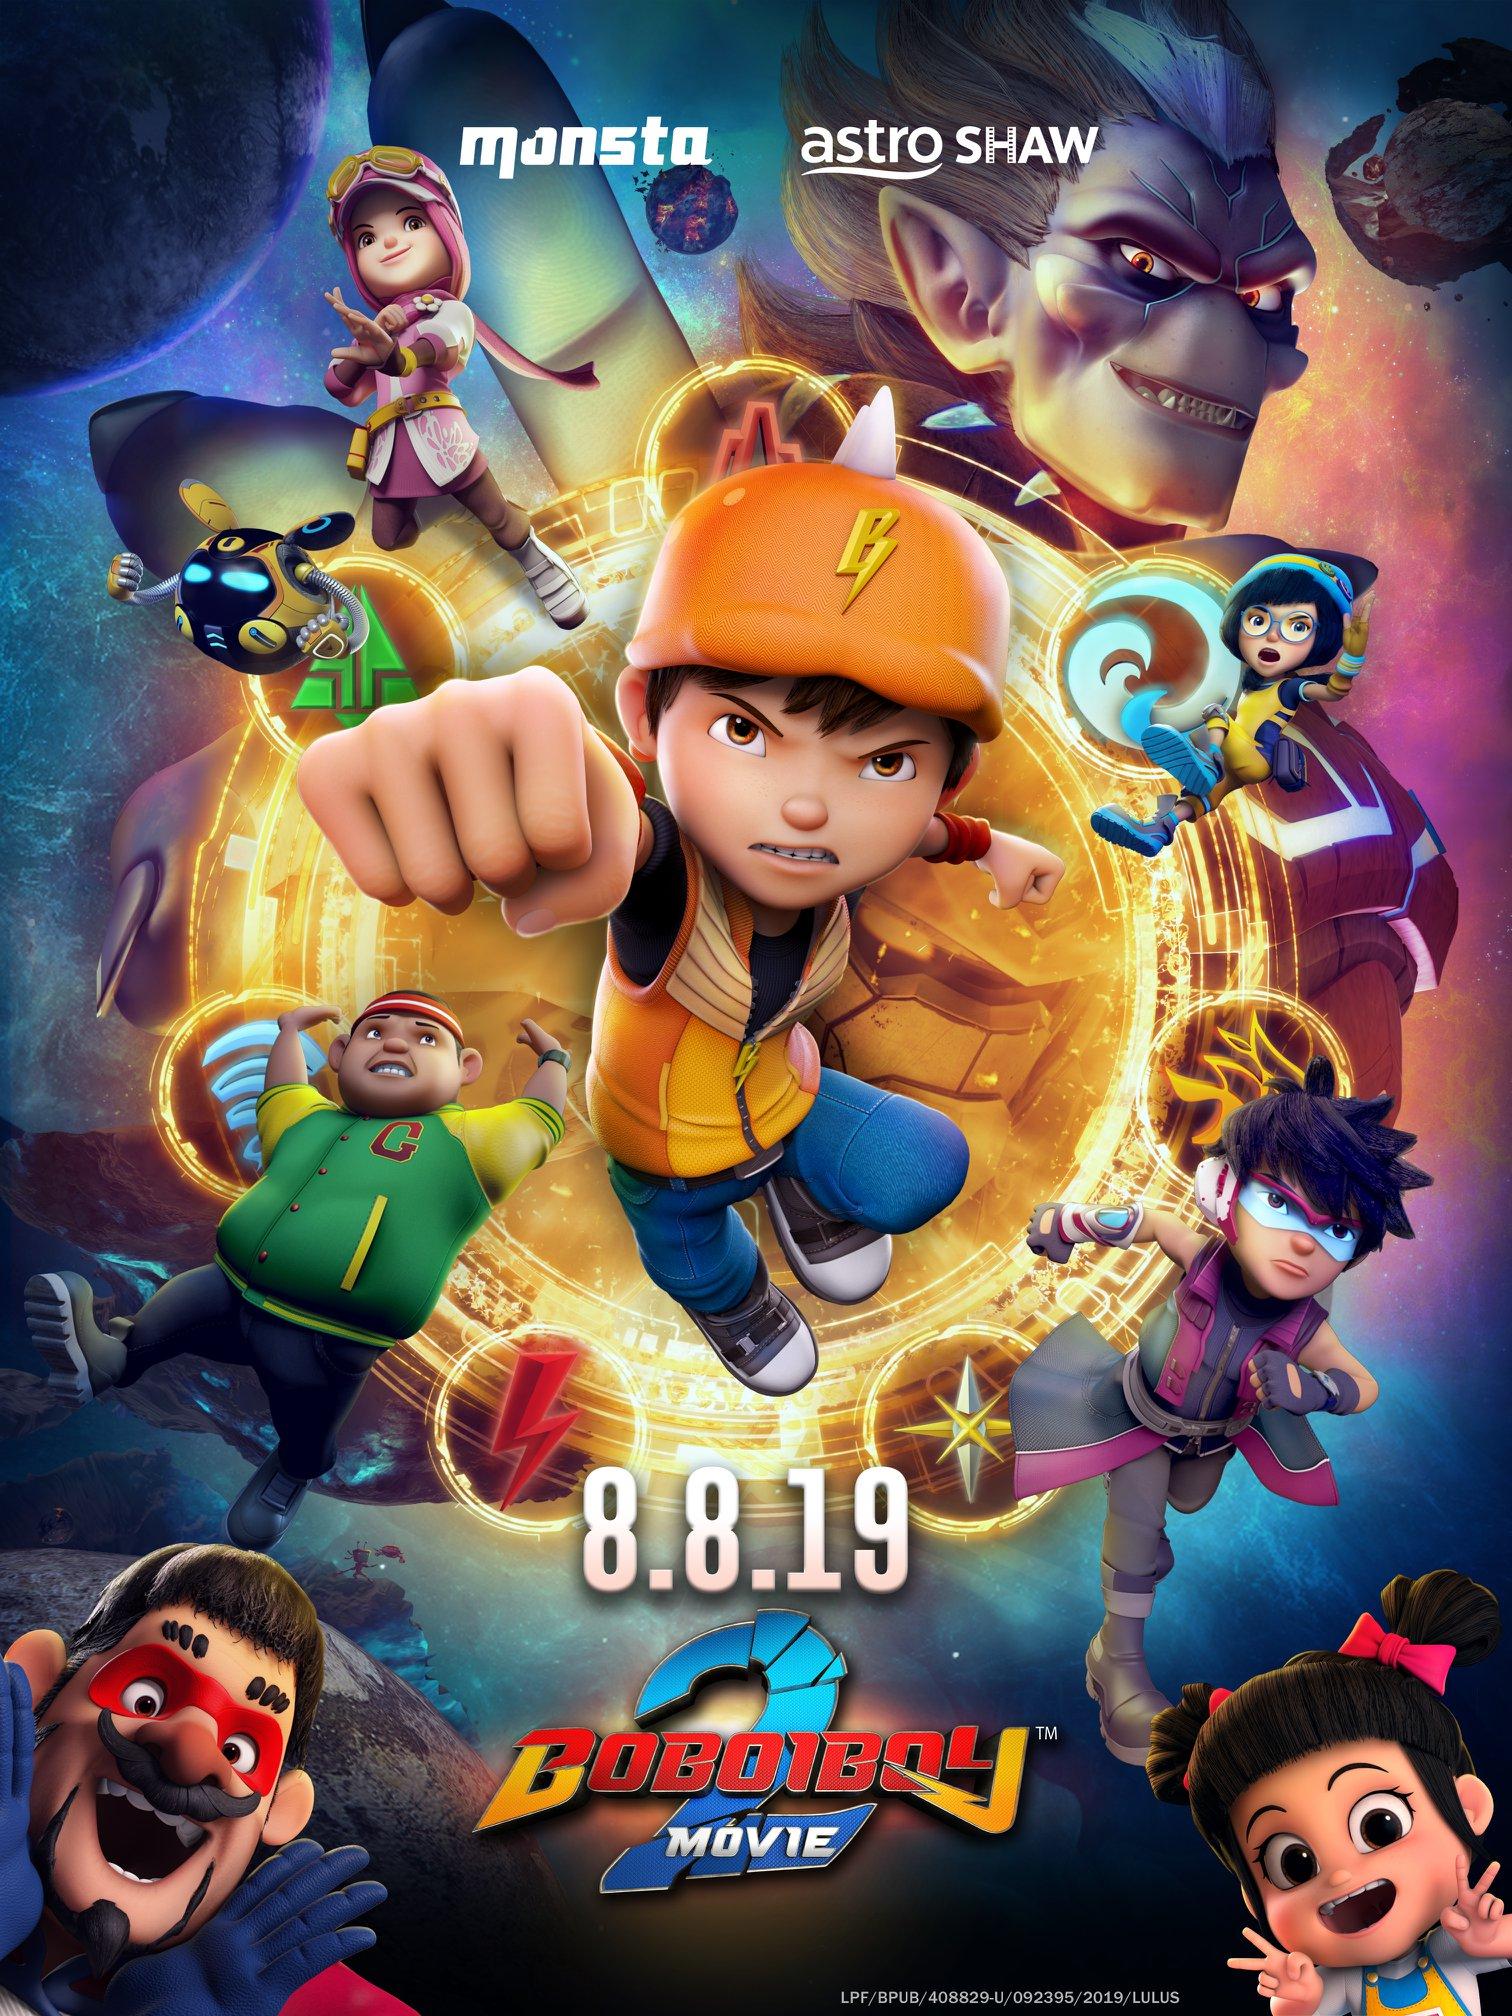  Boboiboy Movie  2 Wallpapers Wallpaper Cave